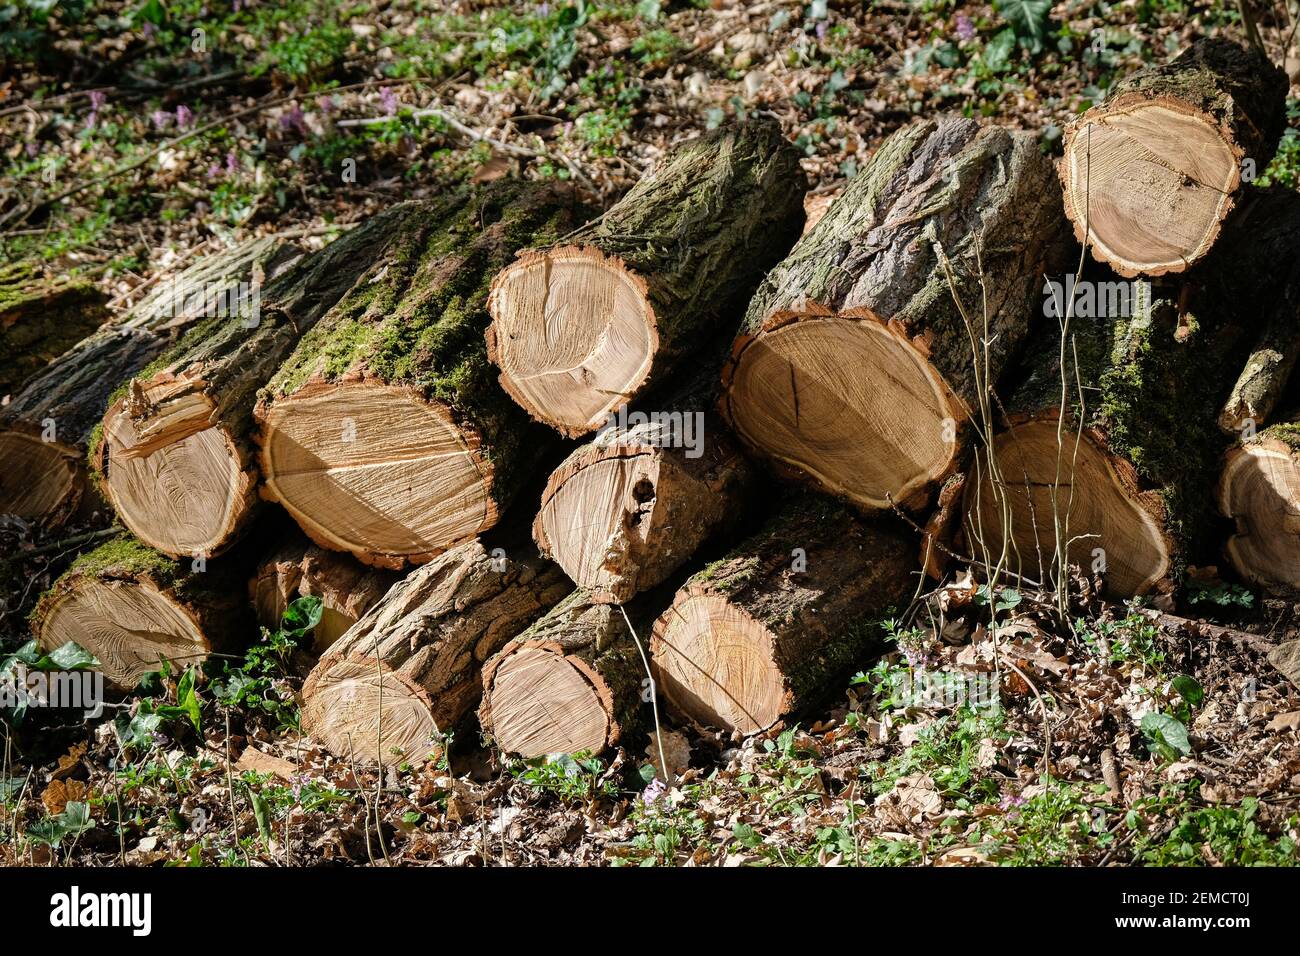 Lyon, France, on February 24, 2021. Logs in a forest. Stock Photo